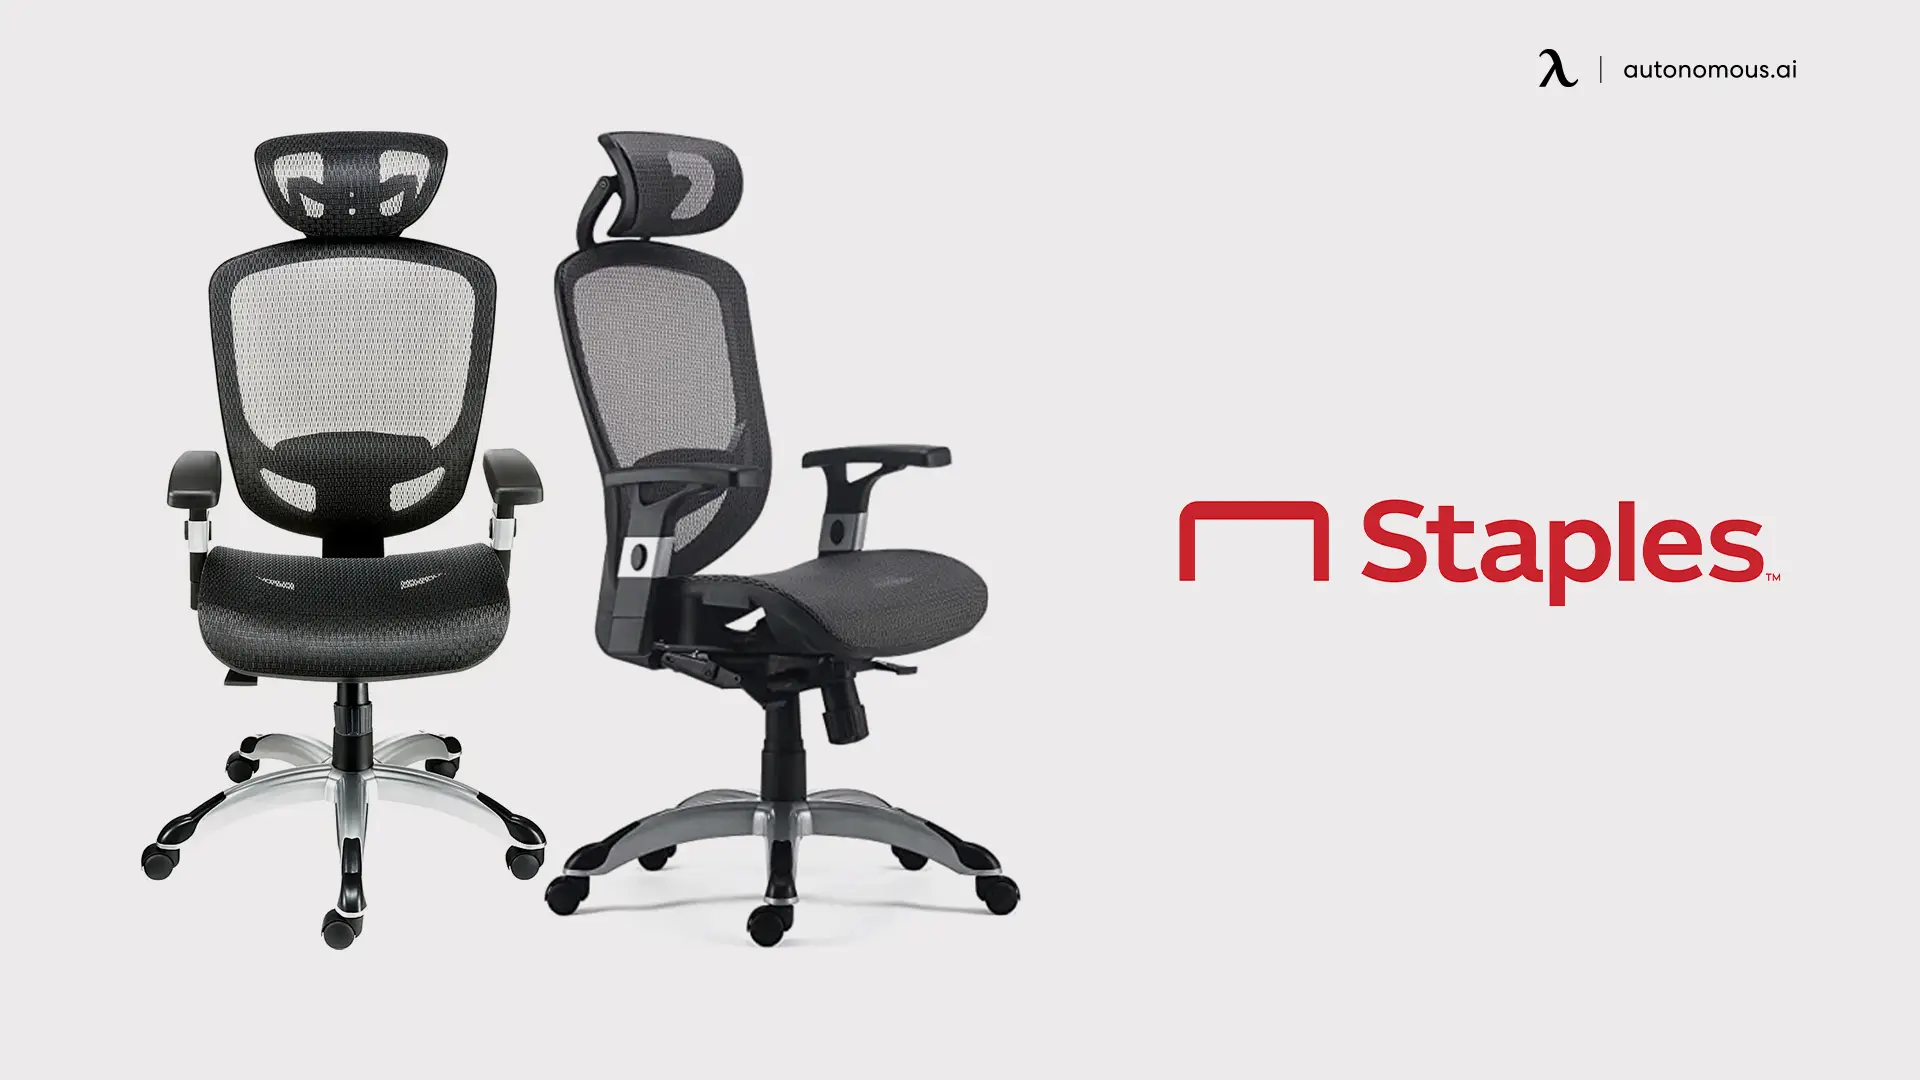 Staples quality office chair brands